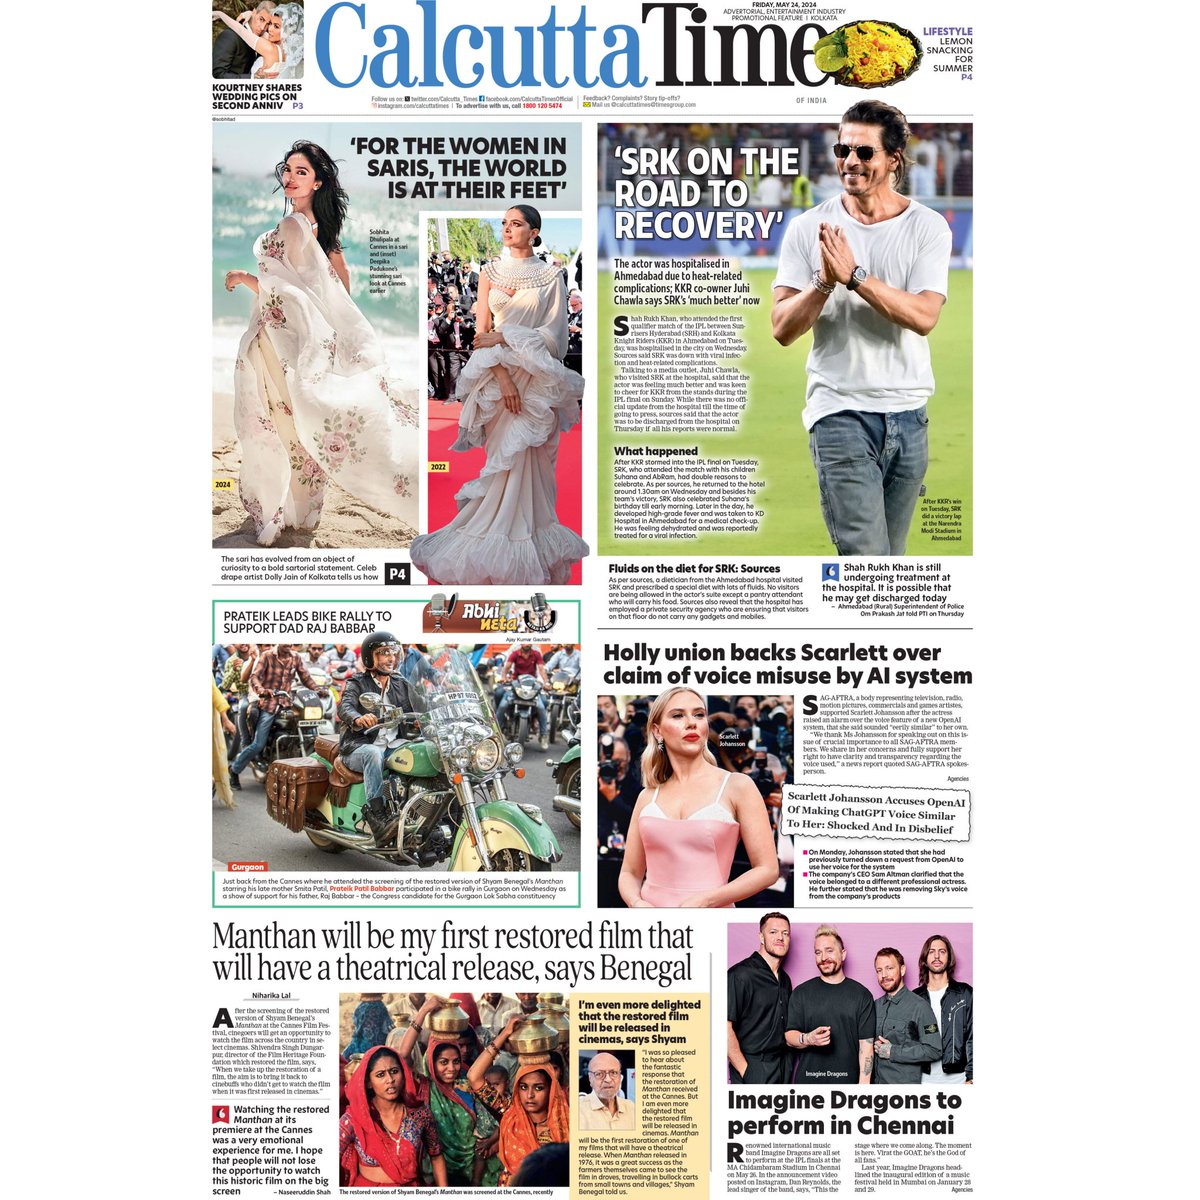 In today's Calcutta Times: An interview with celeb drape artist Dolly Jain, SRK was hospitalised due to heat- related complications, Prateik Patil Babbar leads bike rally to support dad Raj Babbar, and more 

#drapeartist #srk #shahrukhkhan #ipl #prateikbabbar #calcuttatimes